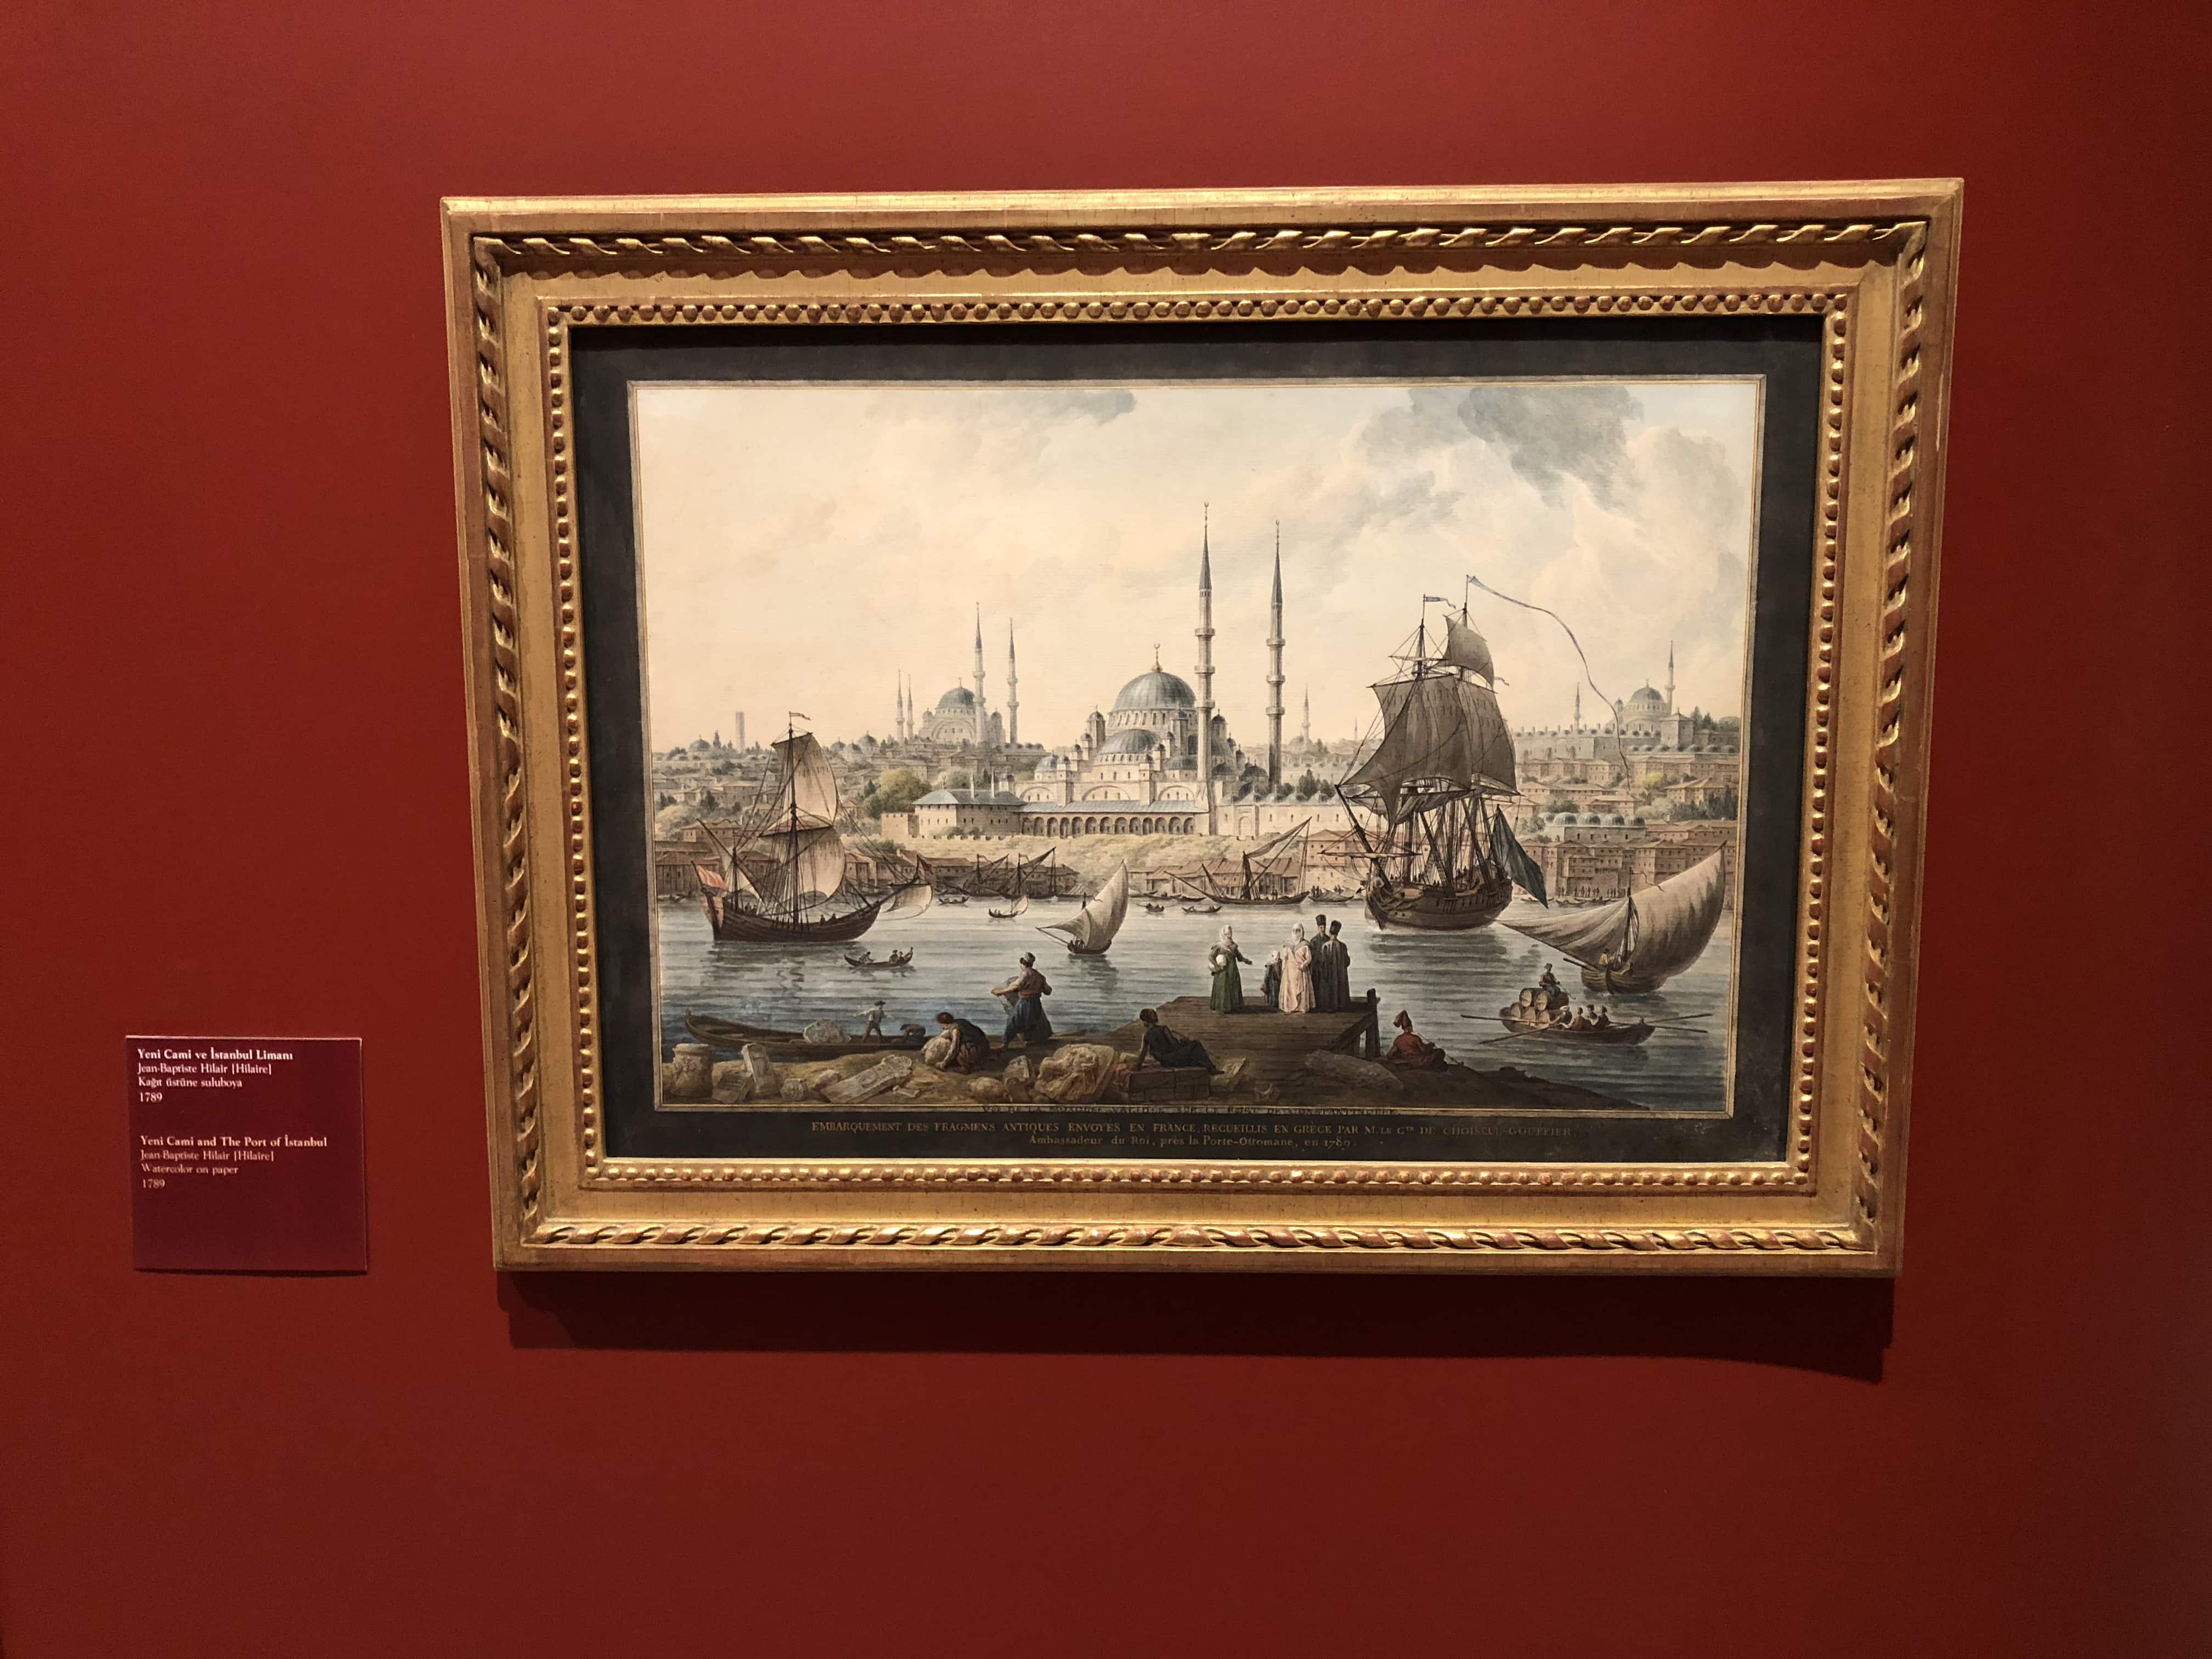 New Mosque and the Port of Istanbul, Jean-Baptiste Hilarie (1789) at the Pera Museum in Istanbul, Turkey